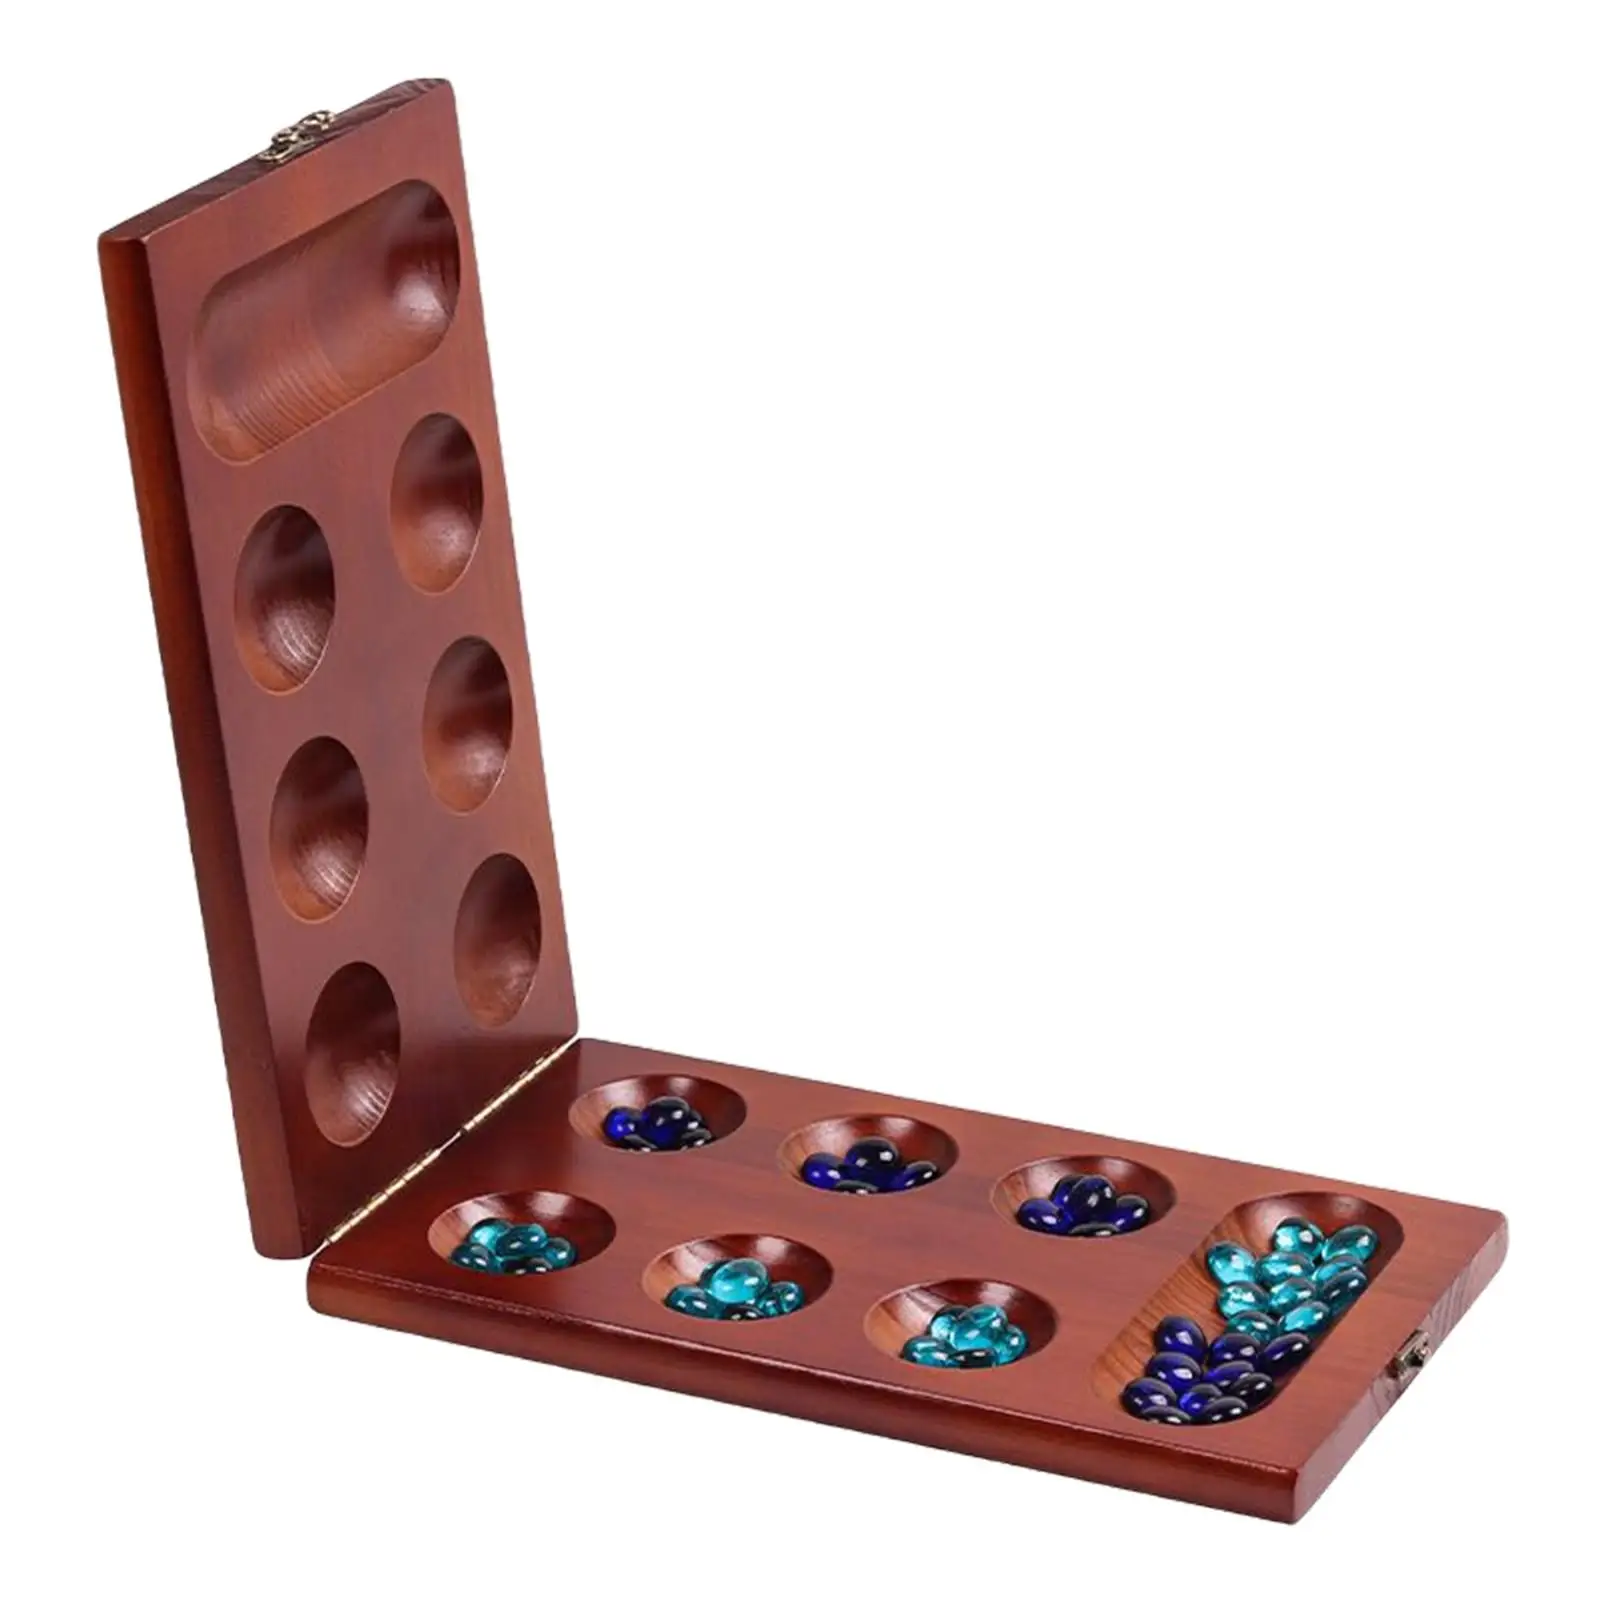 Classic Mancala Board Game, Math Skills with 48 Stones Logic Planning Skills for Entertainment